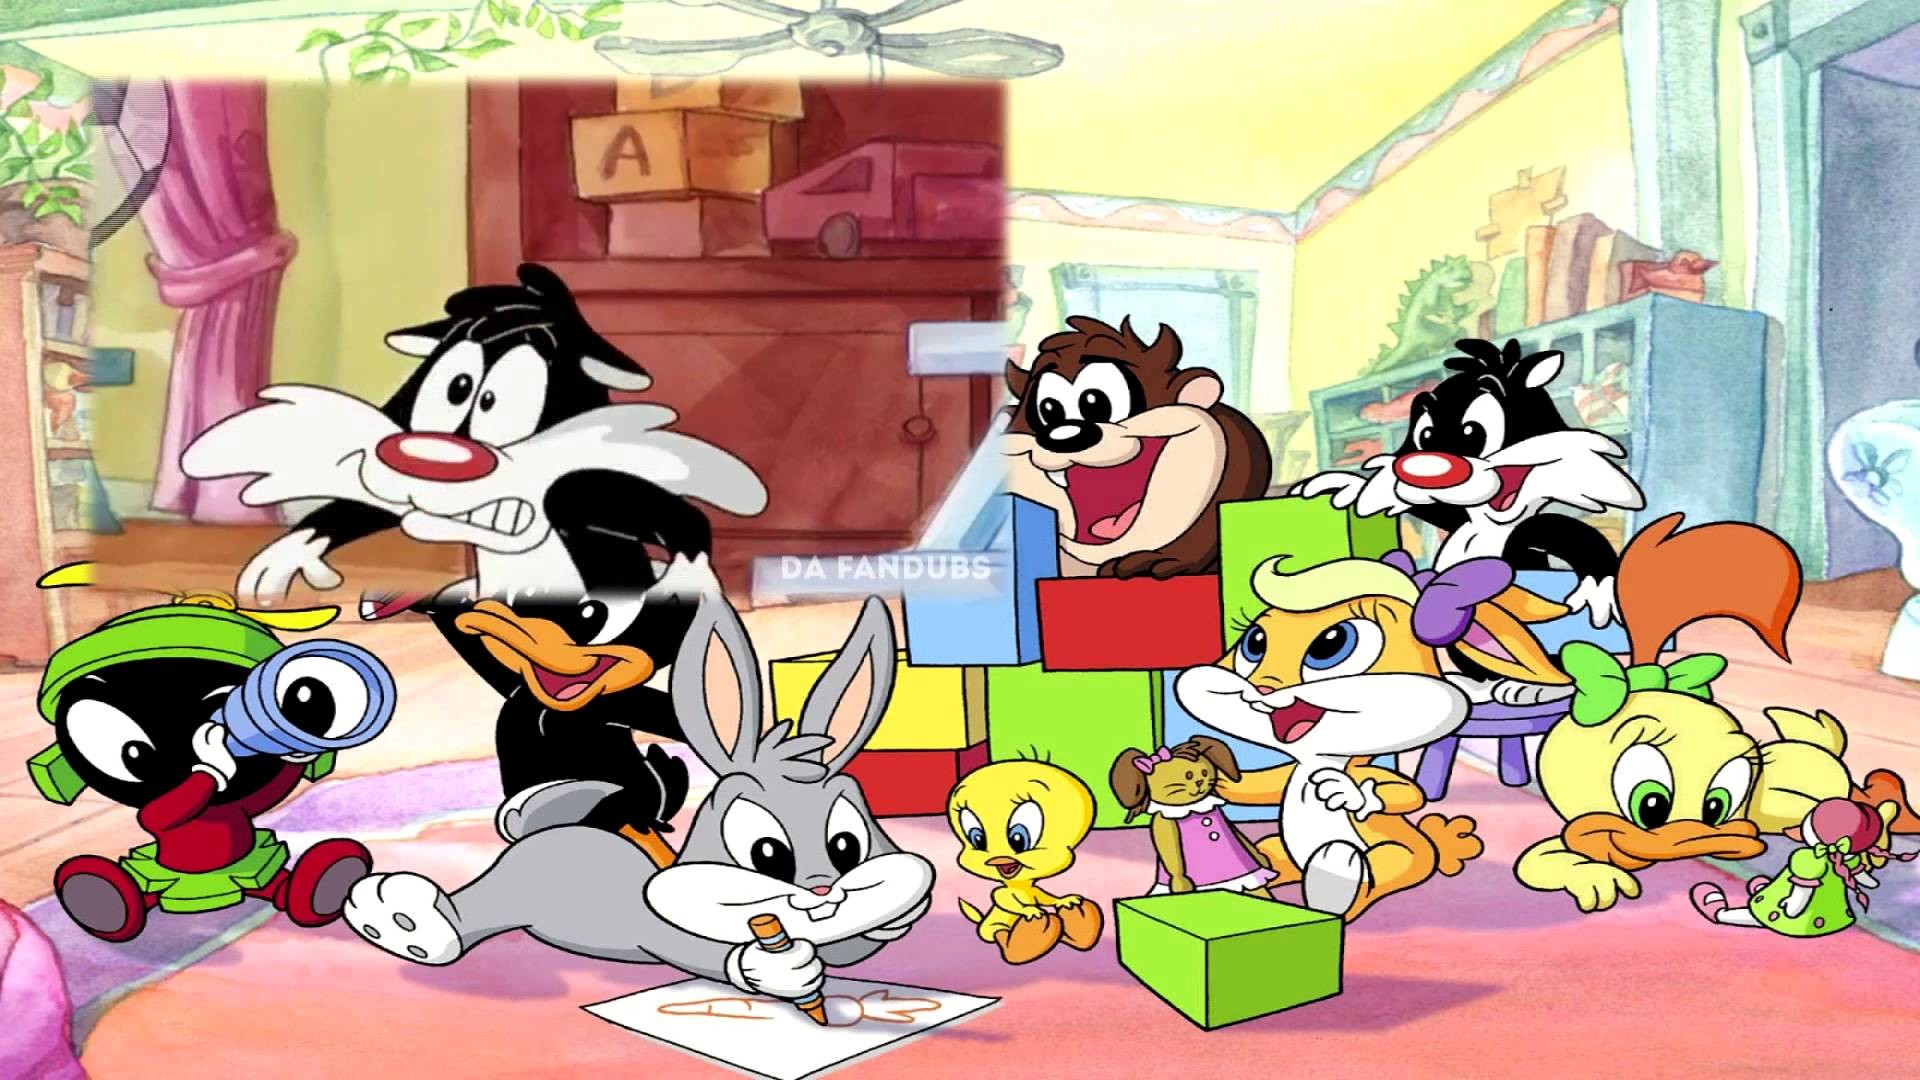 Free download Baby Looney Tunes Wallpaper 52 images [1920x1080